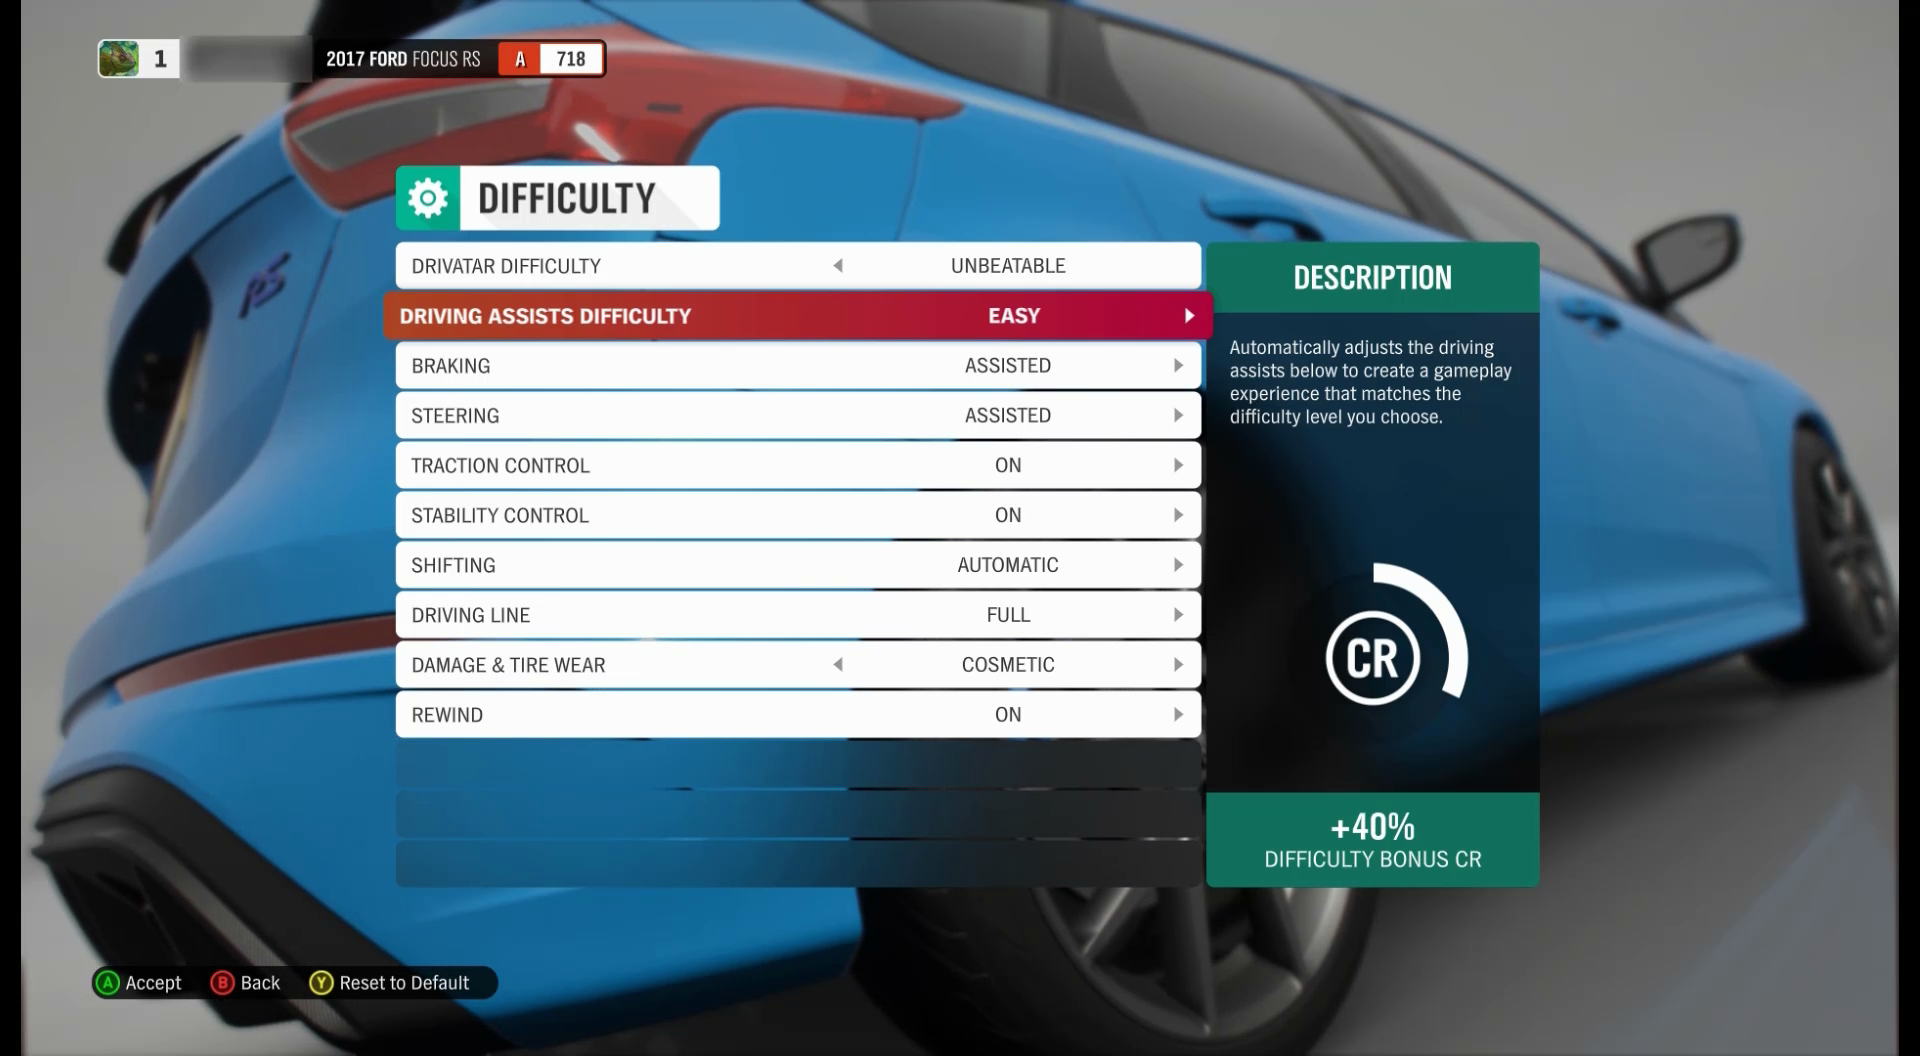 A screenshot of the difficulty menu in Forza Horizon 4. The "driving assists difficulty" option is focused and the current value is easy. There are other difficulty or assist options like breaking, stability control, shifting, and rewind.